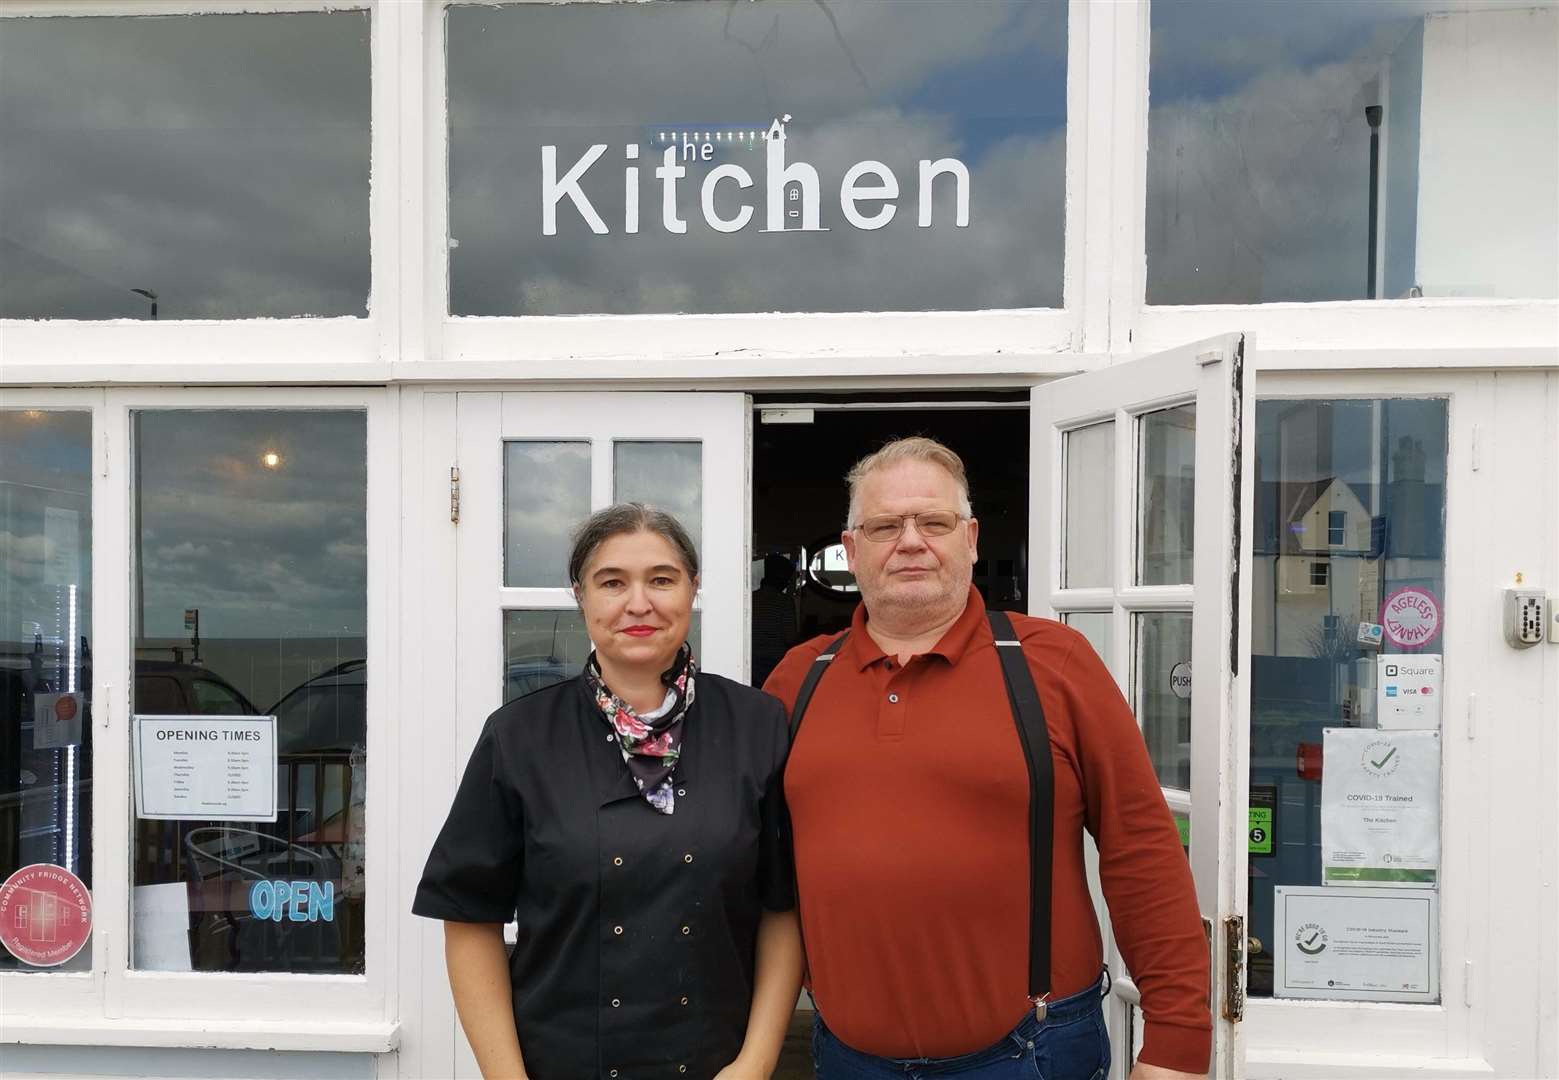 Ann Newstead and Alexander Roarke run The Kitchen, a community cafe which is part of the Thanet Iceberg Project.